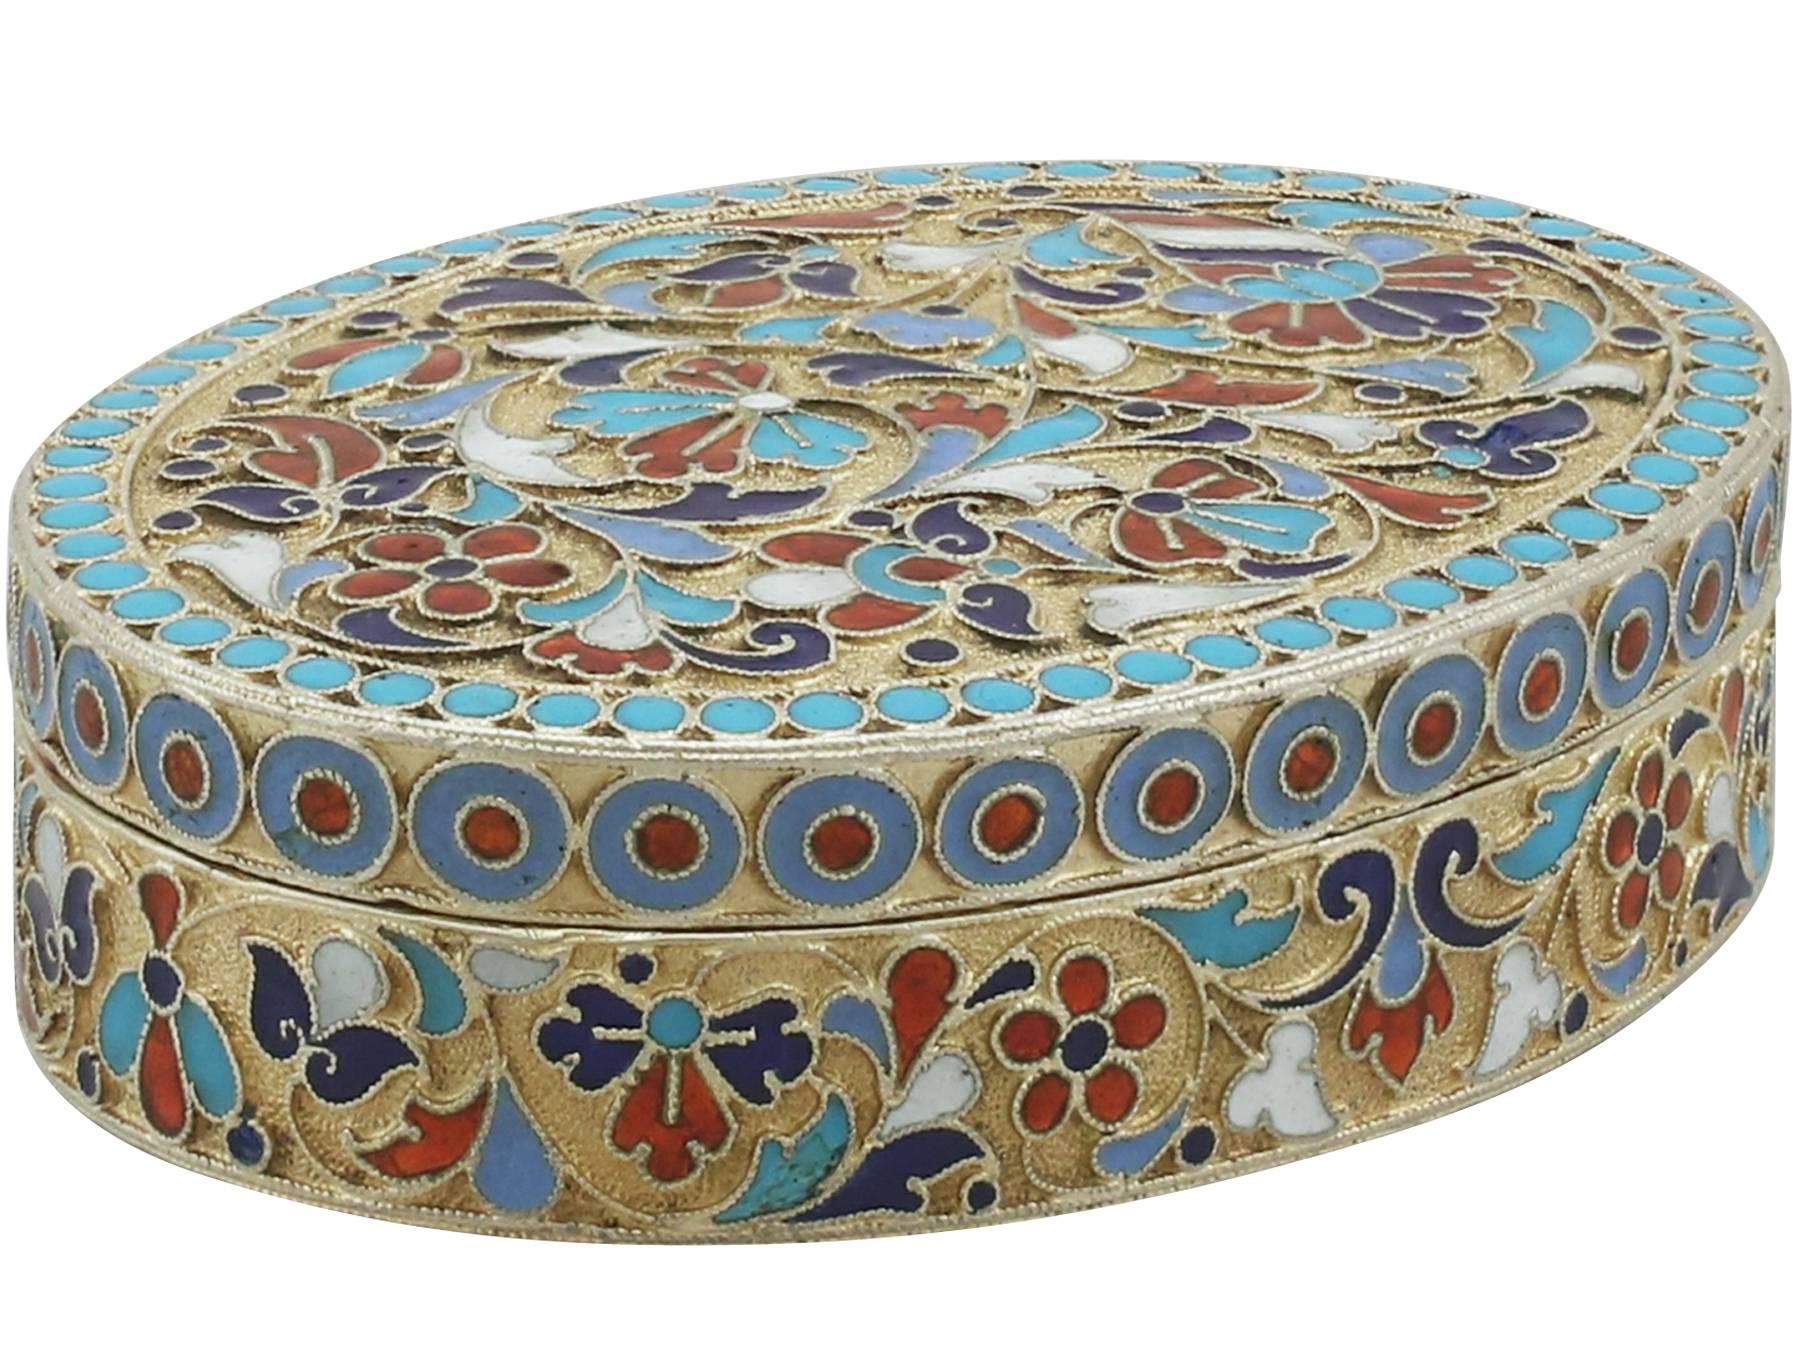 An exceptional, fine and impressive antique Russian silver gilt and polychrome cloisonné enamel box; an addition to our Russian silverware collection

This exceptional antique Russian silver gilt and polychrome cloisonné enamel box has an oval